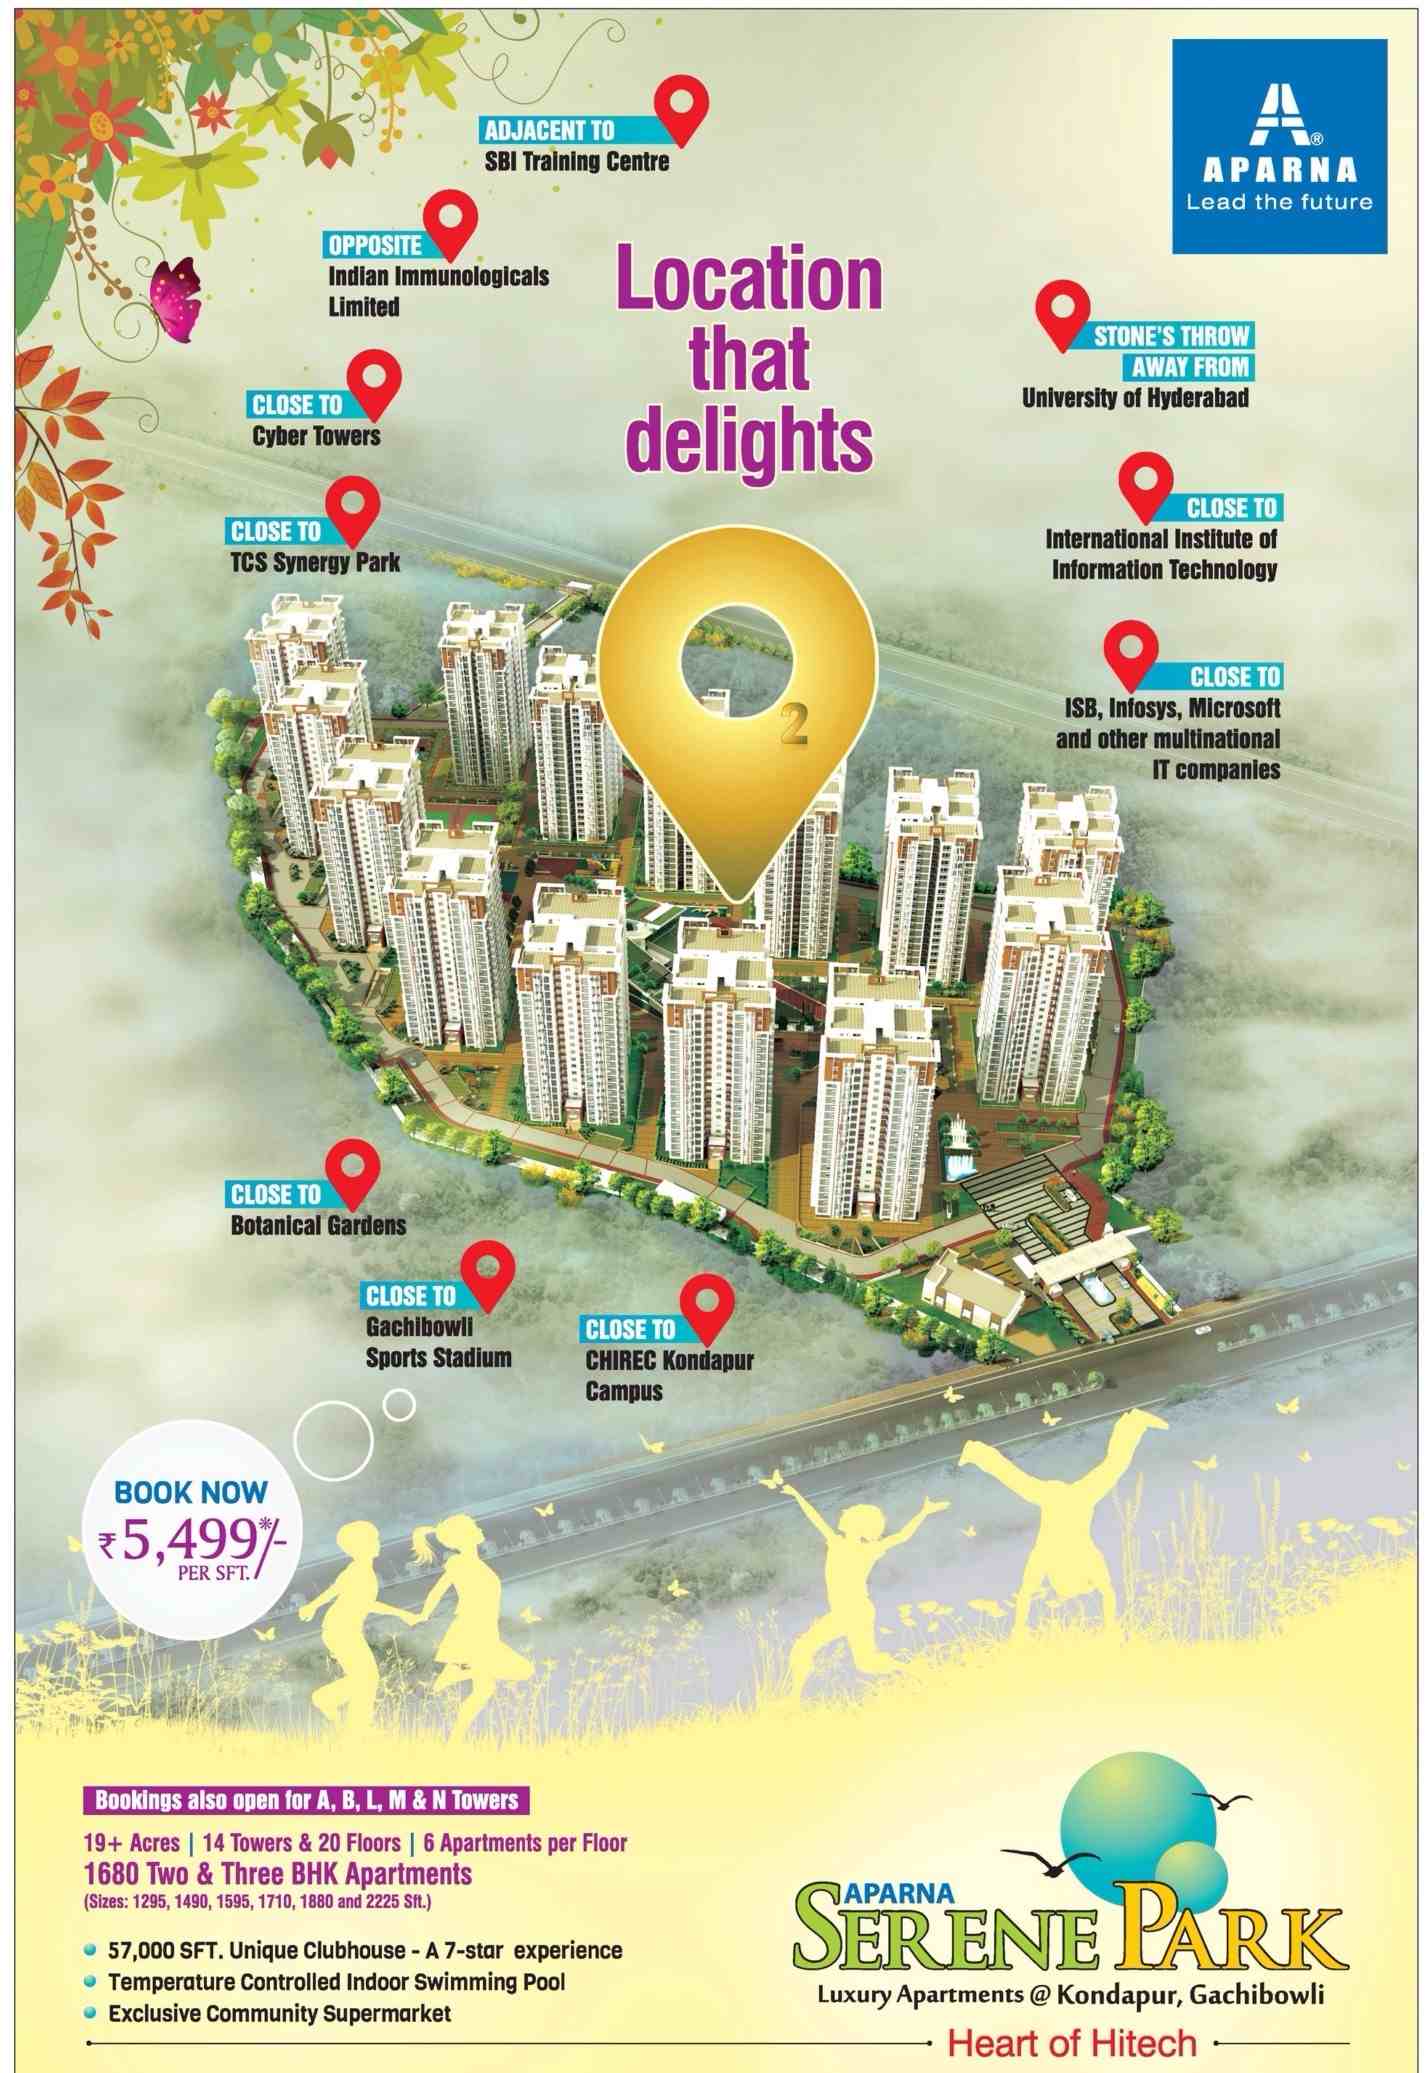 Reside at Aparna Serene Park and be delighted by the location in Hyderabad